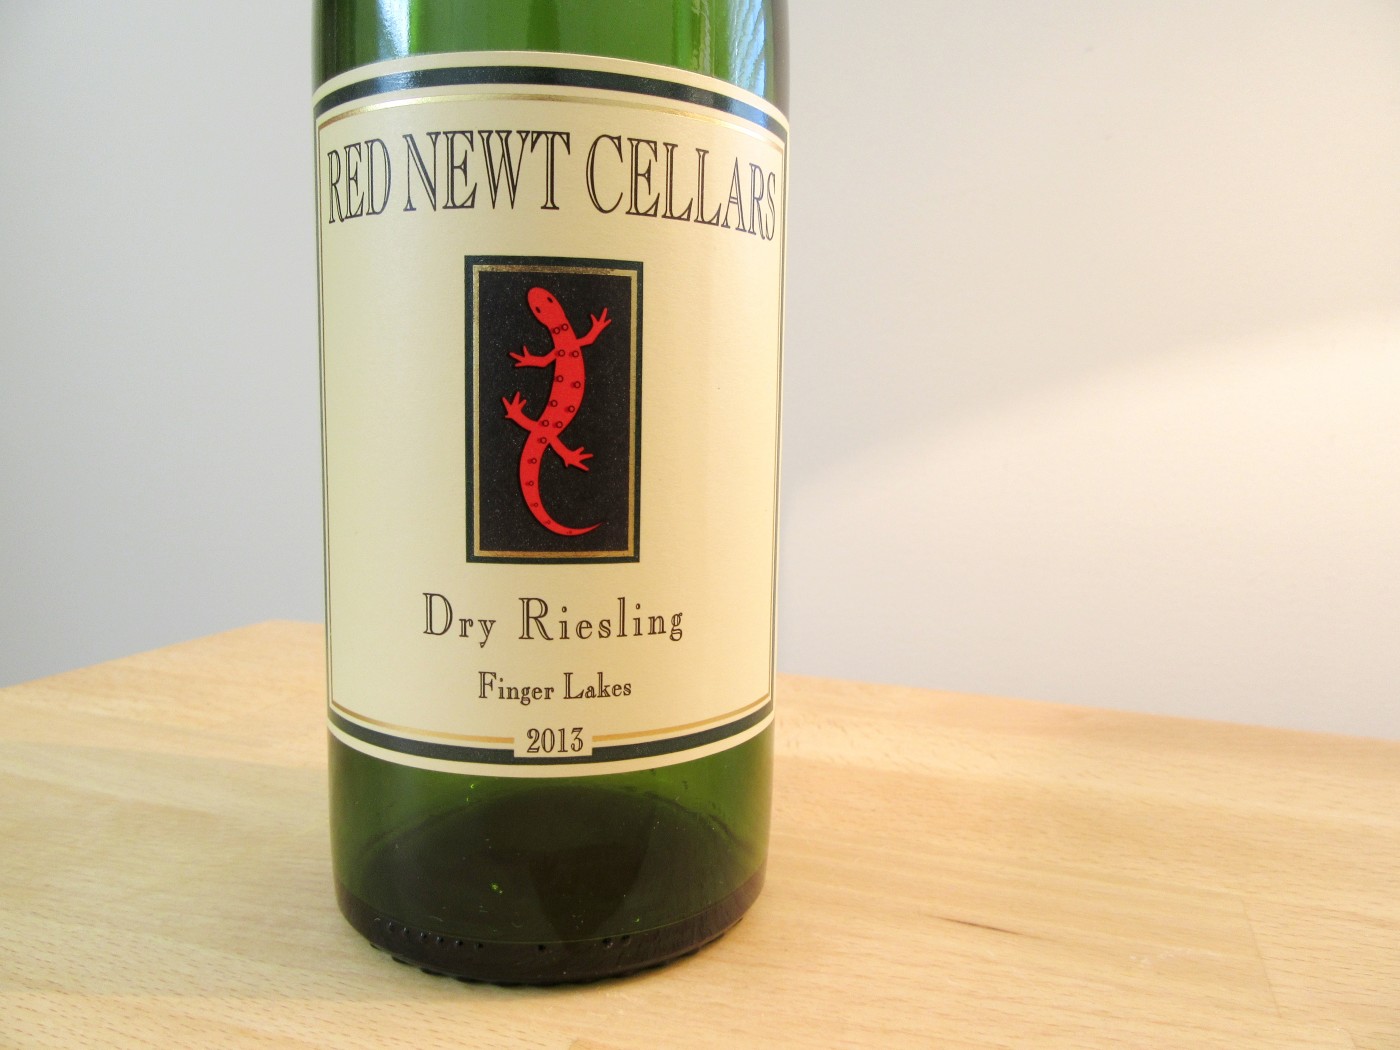 Red Newt Cellars, Dry Riesling 2013, Finger Lakes, New York, Wine Casual